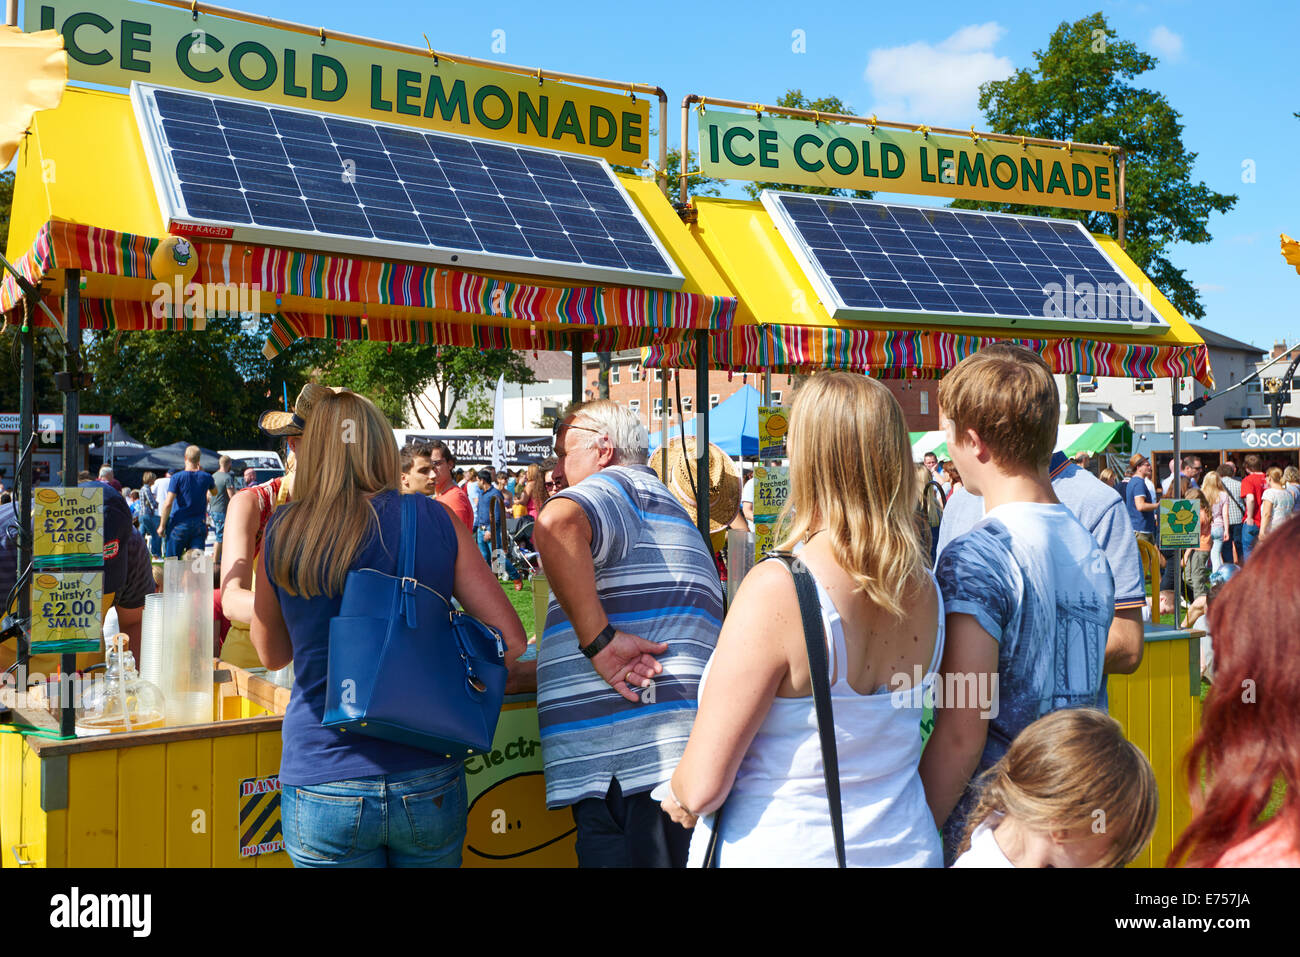 People Queuing At An Ice Cold Lemonade Stall At The Food And Drink Festival Leamington Spa Warwickshire UK Stock Photo